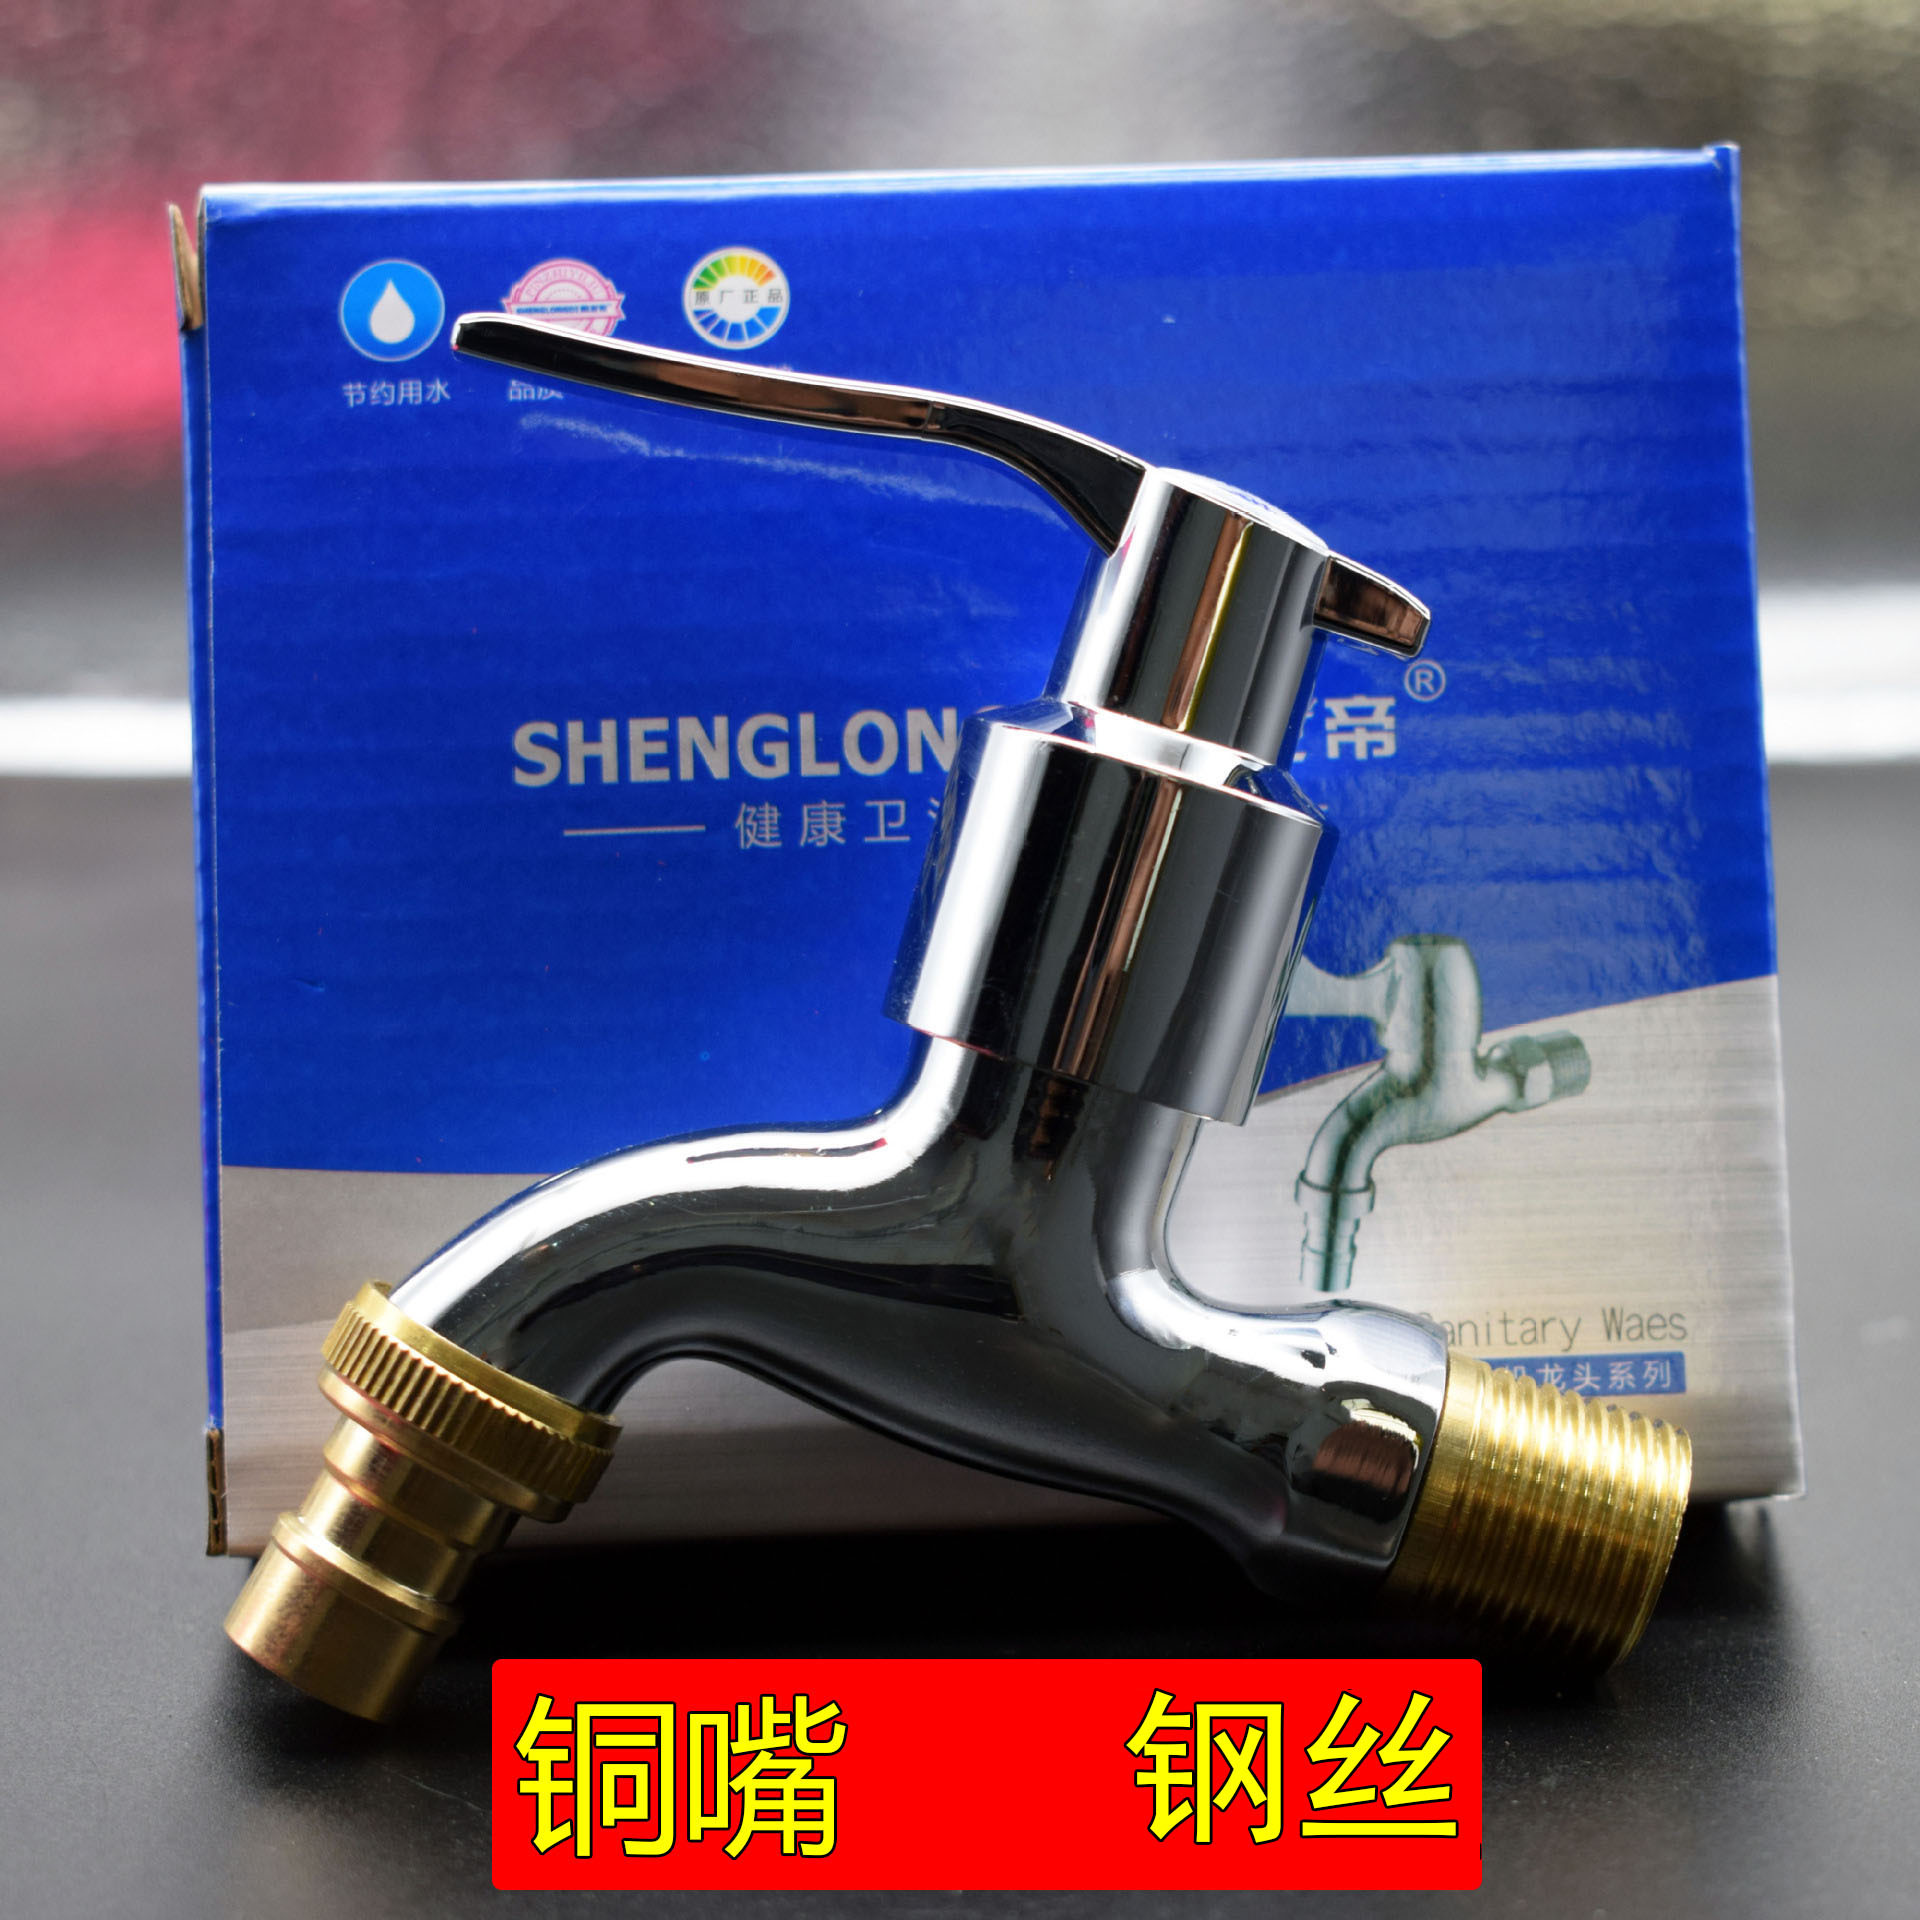 Copper Core Alloy Stainless Steel Washing Machine Tap Water Mouth Copper Teeth Copper Nozzle Stainless Steel Washing Machine Tap Bibcock Tap Water Mouth